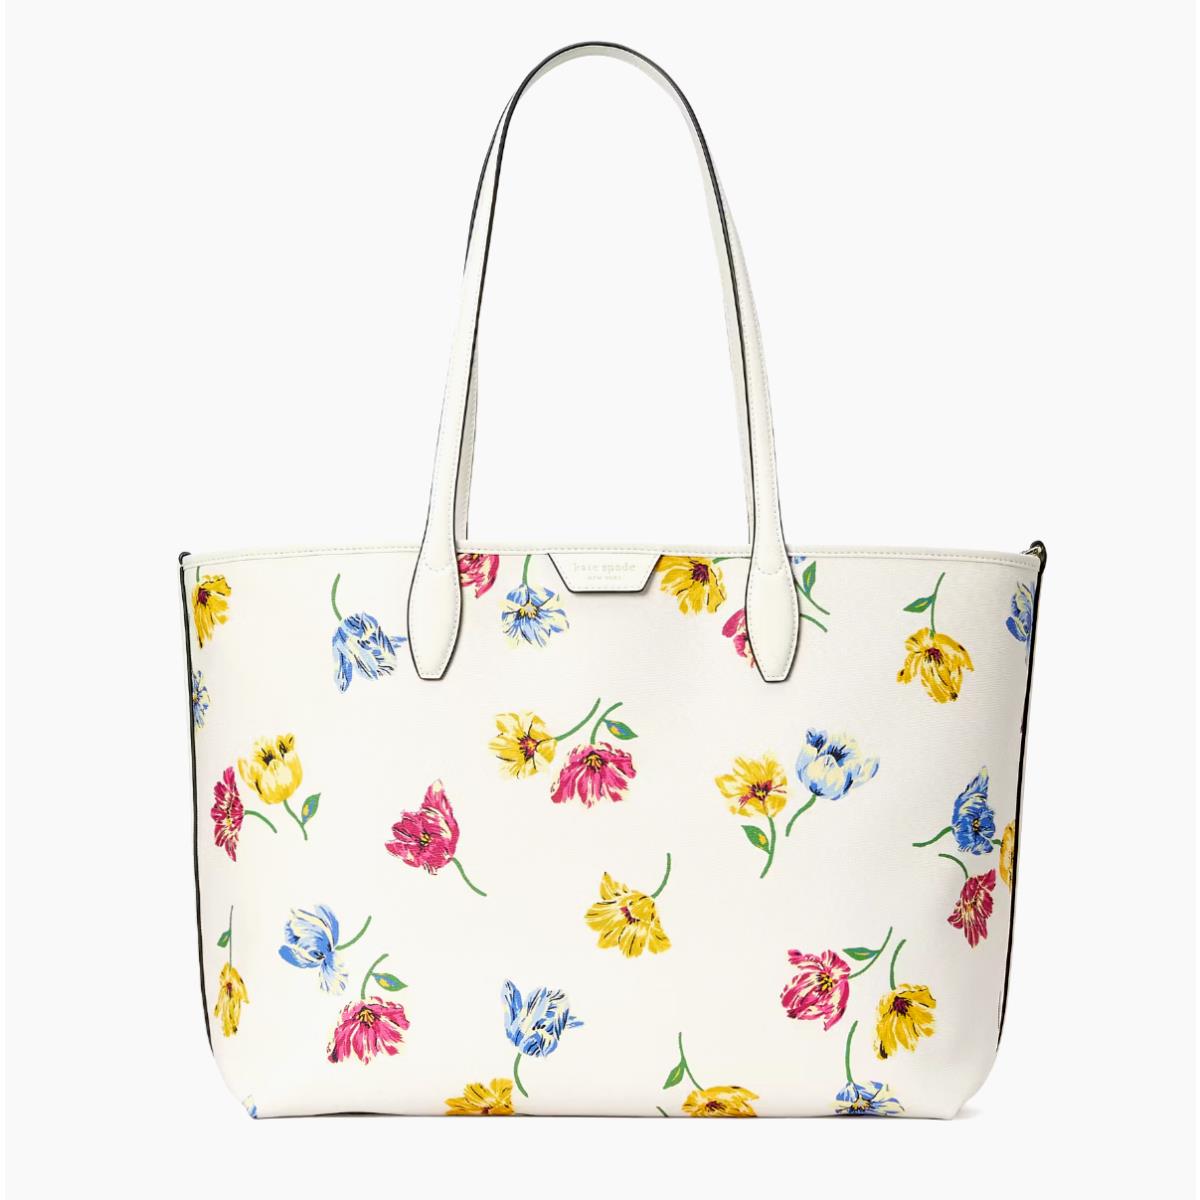 New Kate Spade Sutton Tulip Toss Printed Medium Tote with Dust Bag